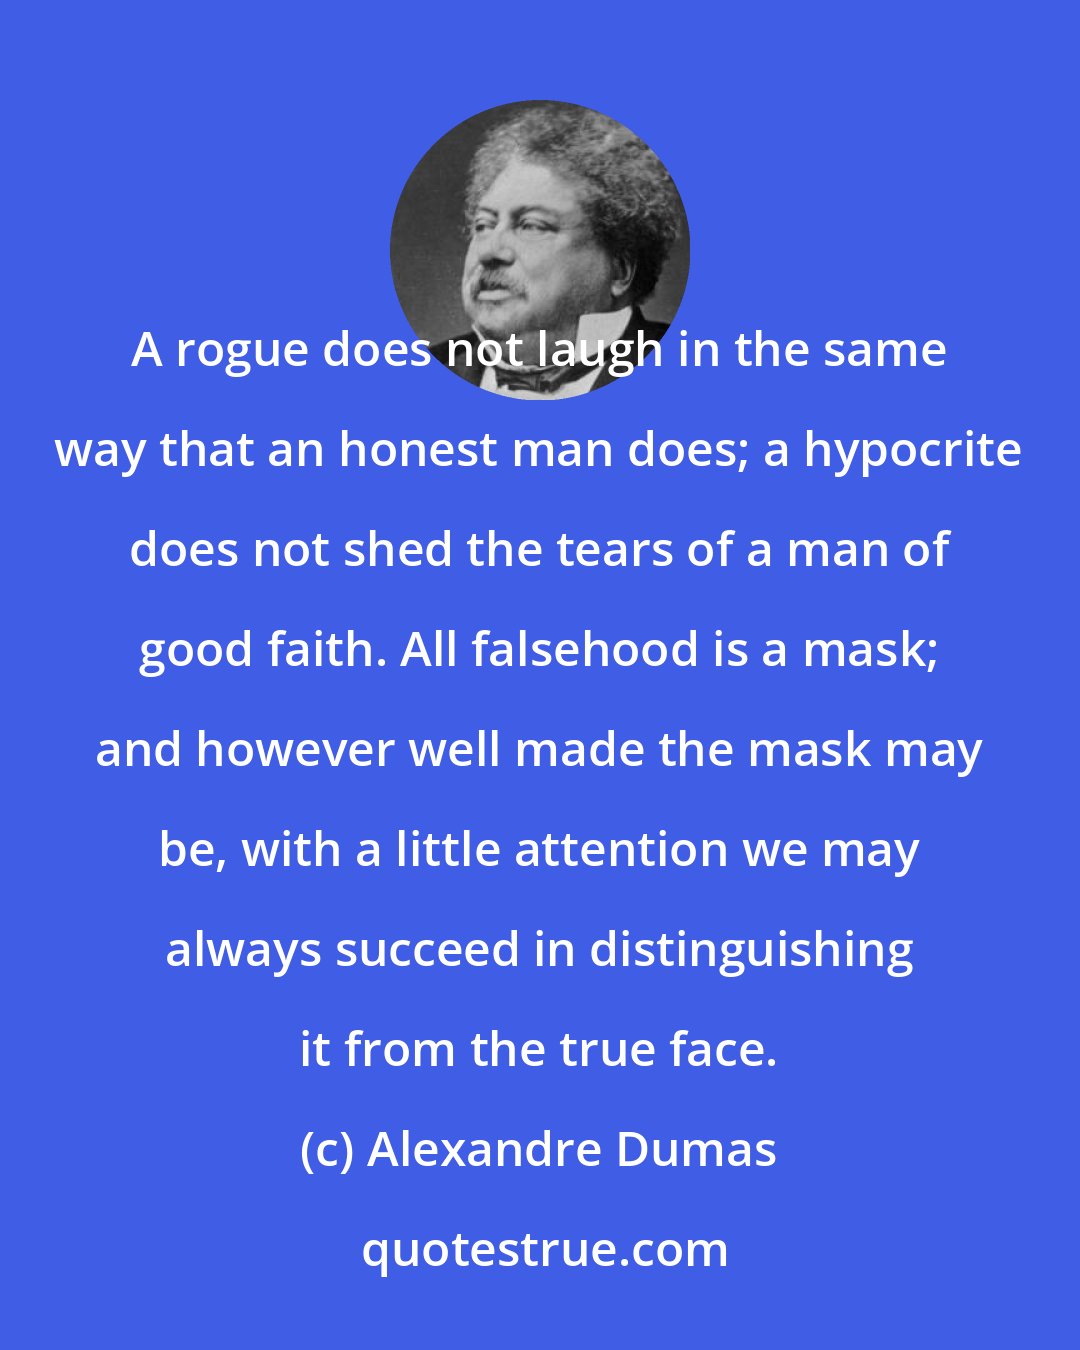 Alexandre Dumas: A rogue does not laugh in the same way that an honest man does; a hypocrite does not shed the tears of a man of good faith. All falsehood is a mask; and however well made the mask may be, with a little attention we may always succeed in distinguishing it from the true face.